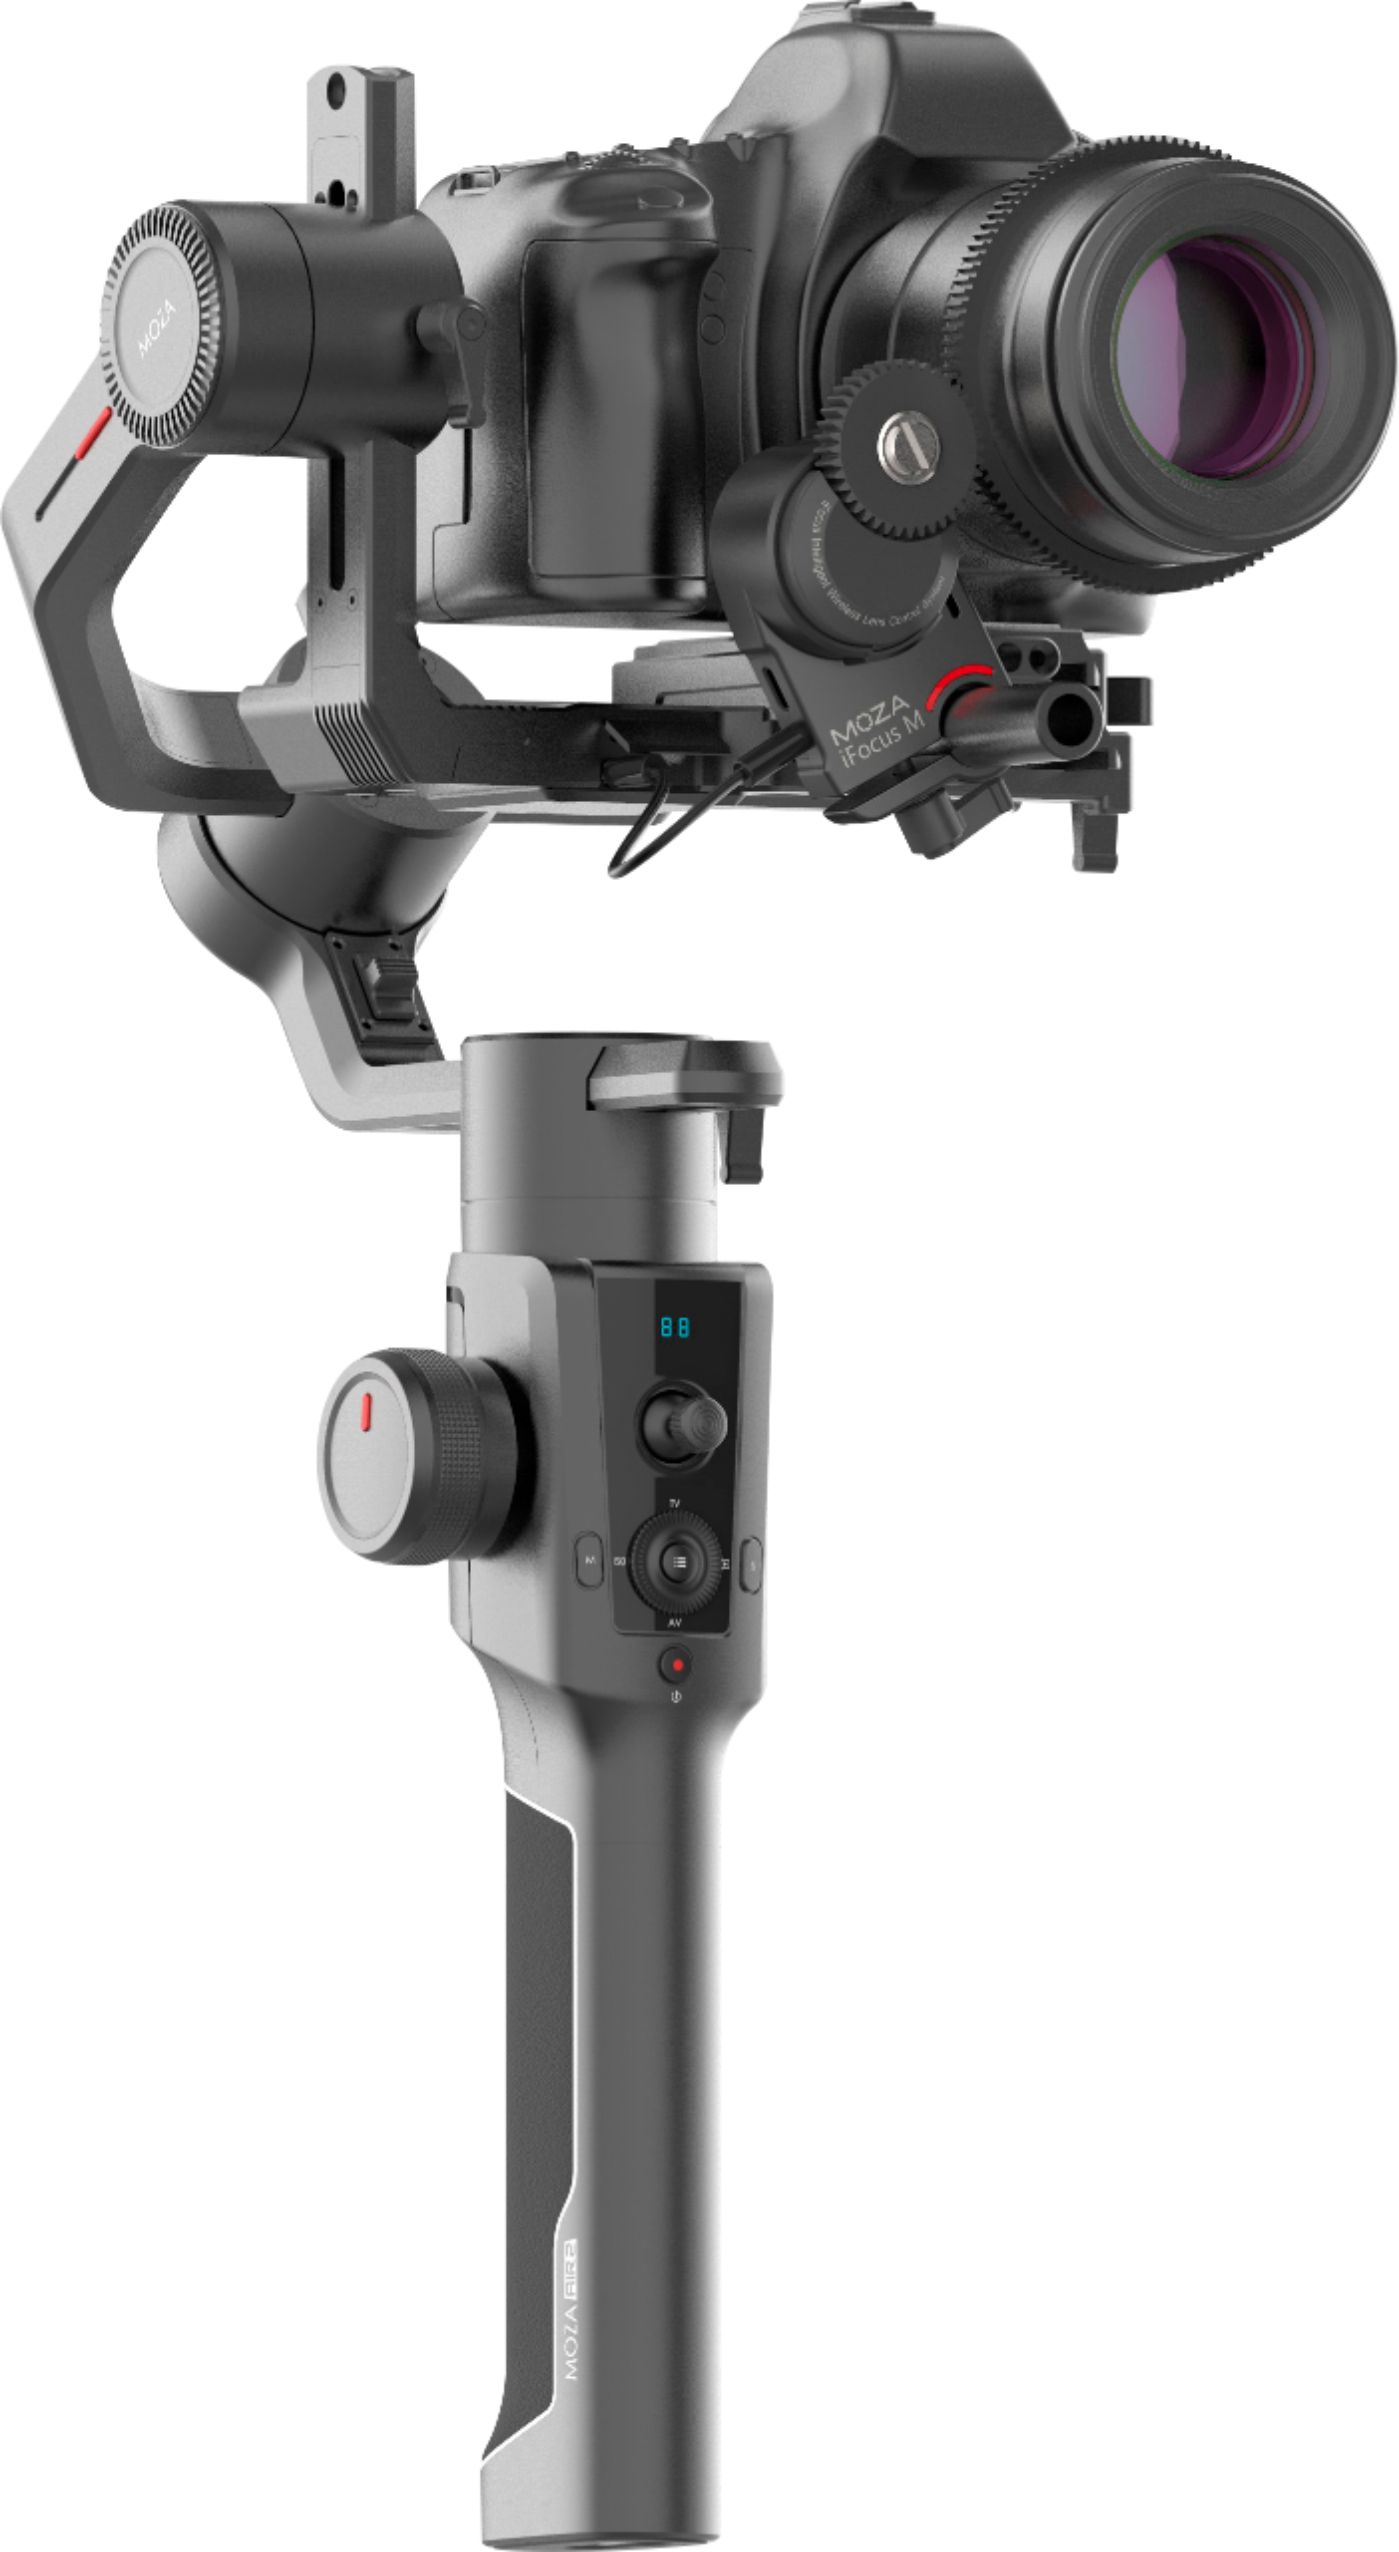 Moza Air 2 3-Axis Handheld Gimbal Stabilizer for DSLR - Best Buy